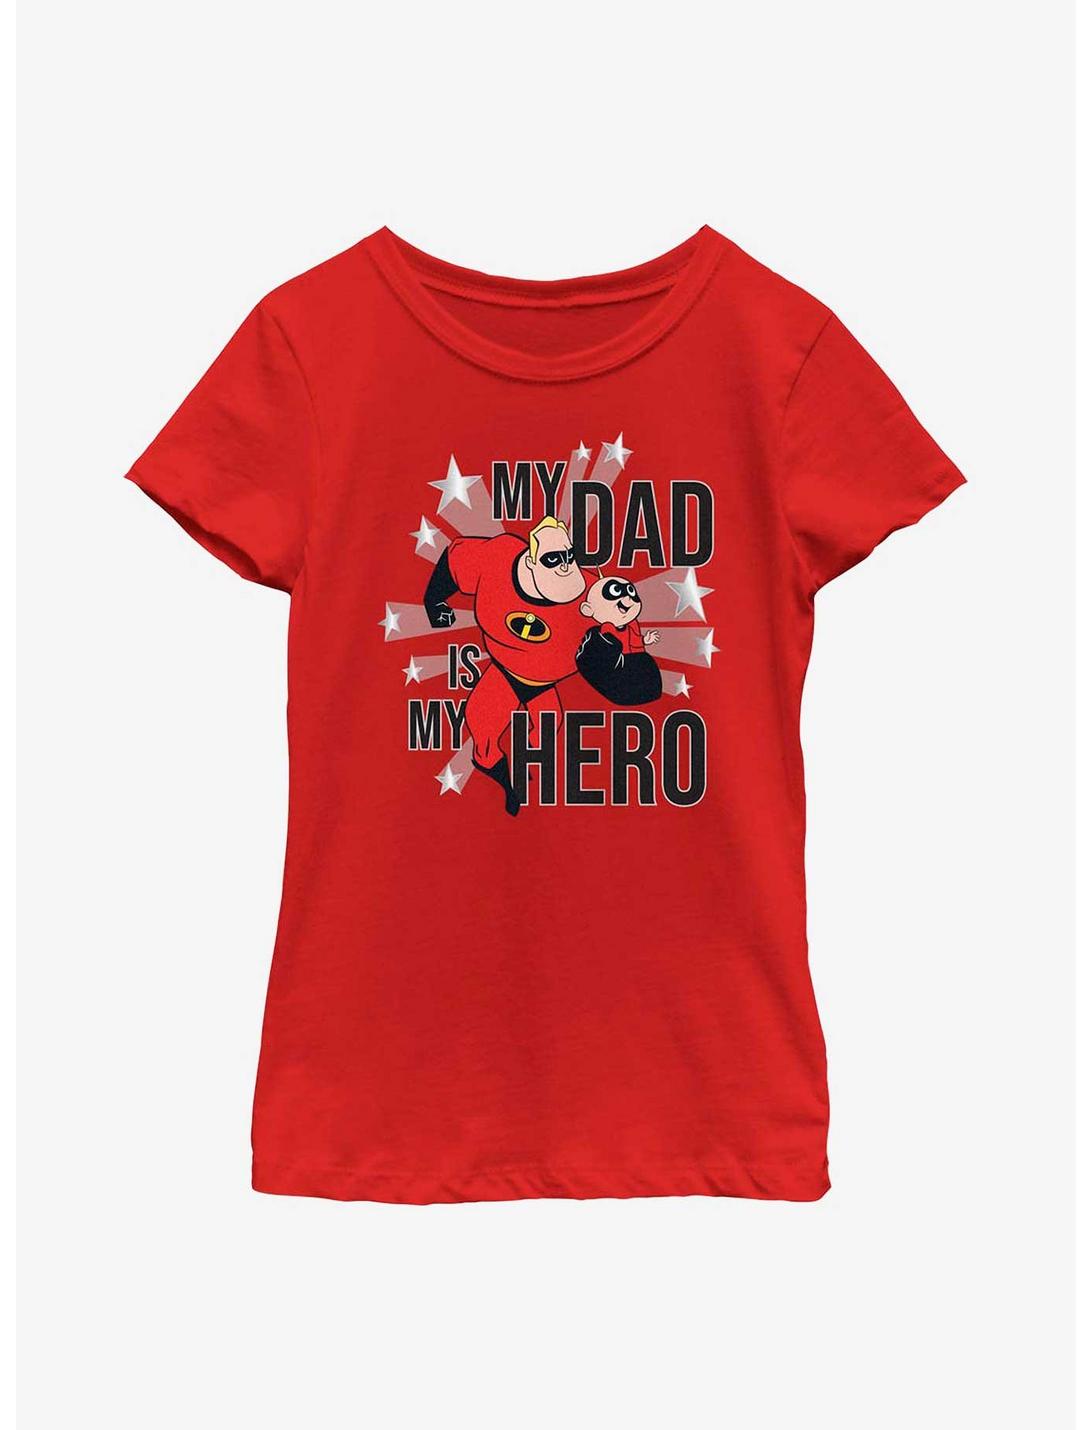 Disney Pixar The Incredibles My Dad Is My Hero Youth Girls T-Shirt, RED, hi-res